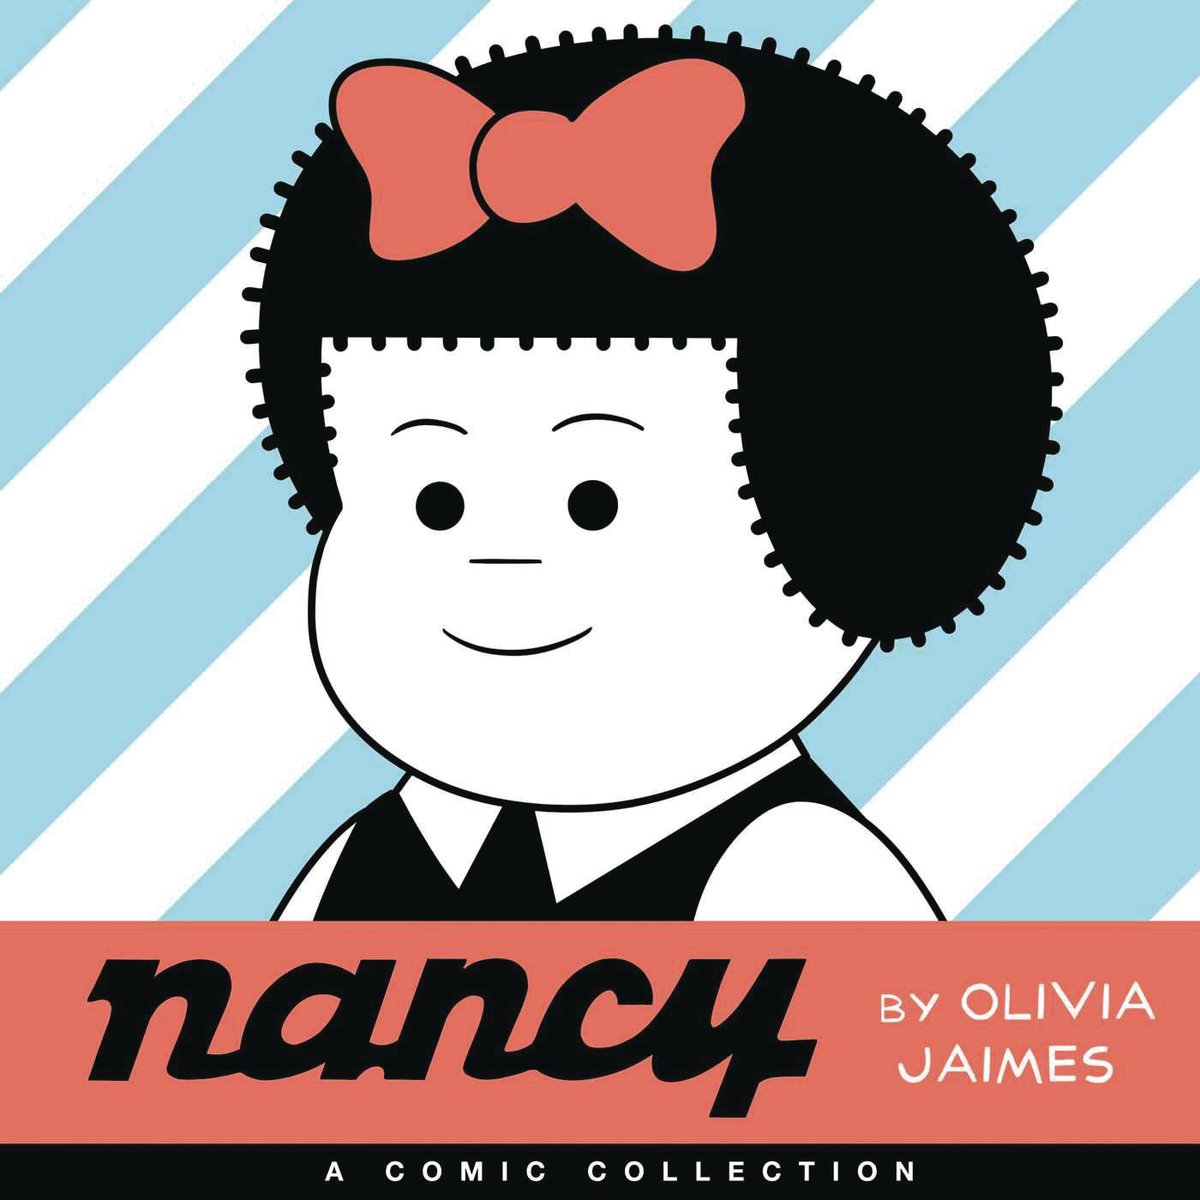 72. NANCY: A COMICS COLLECTIONBy  #OliviaJames,  @nancysweatyedi1,  #LucasWetzel,  #DavidDouglass,  #ChuckHarper,  #AmyStrassner,  #SpencerWilliams and  #SethStPierreOlivia James is one of the most exciting voices in comics and this collection showcases why!